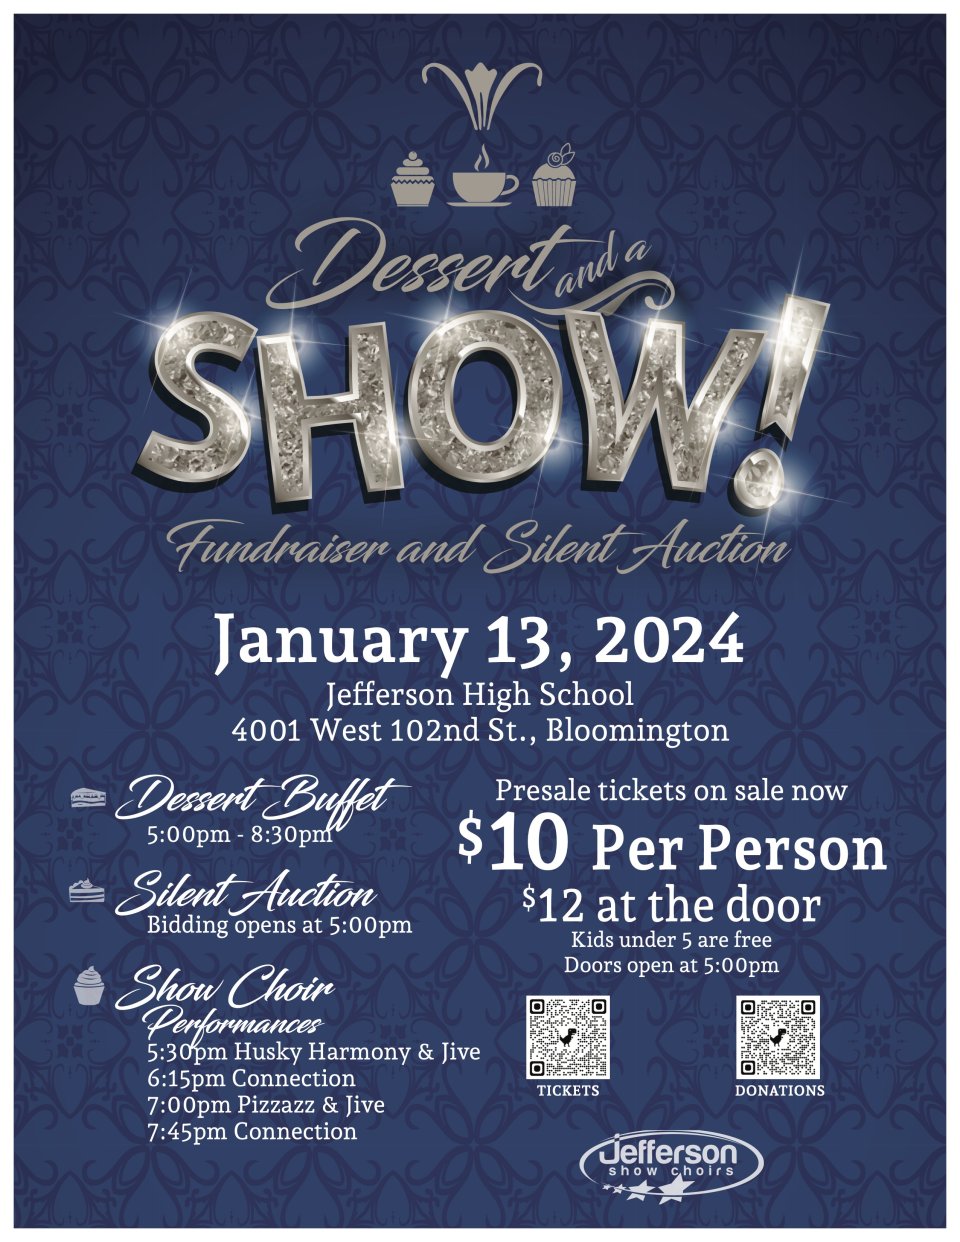 Poster for Jefferson High School's Dessert and a Show